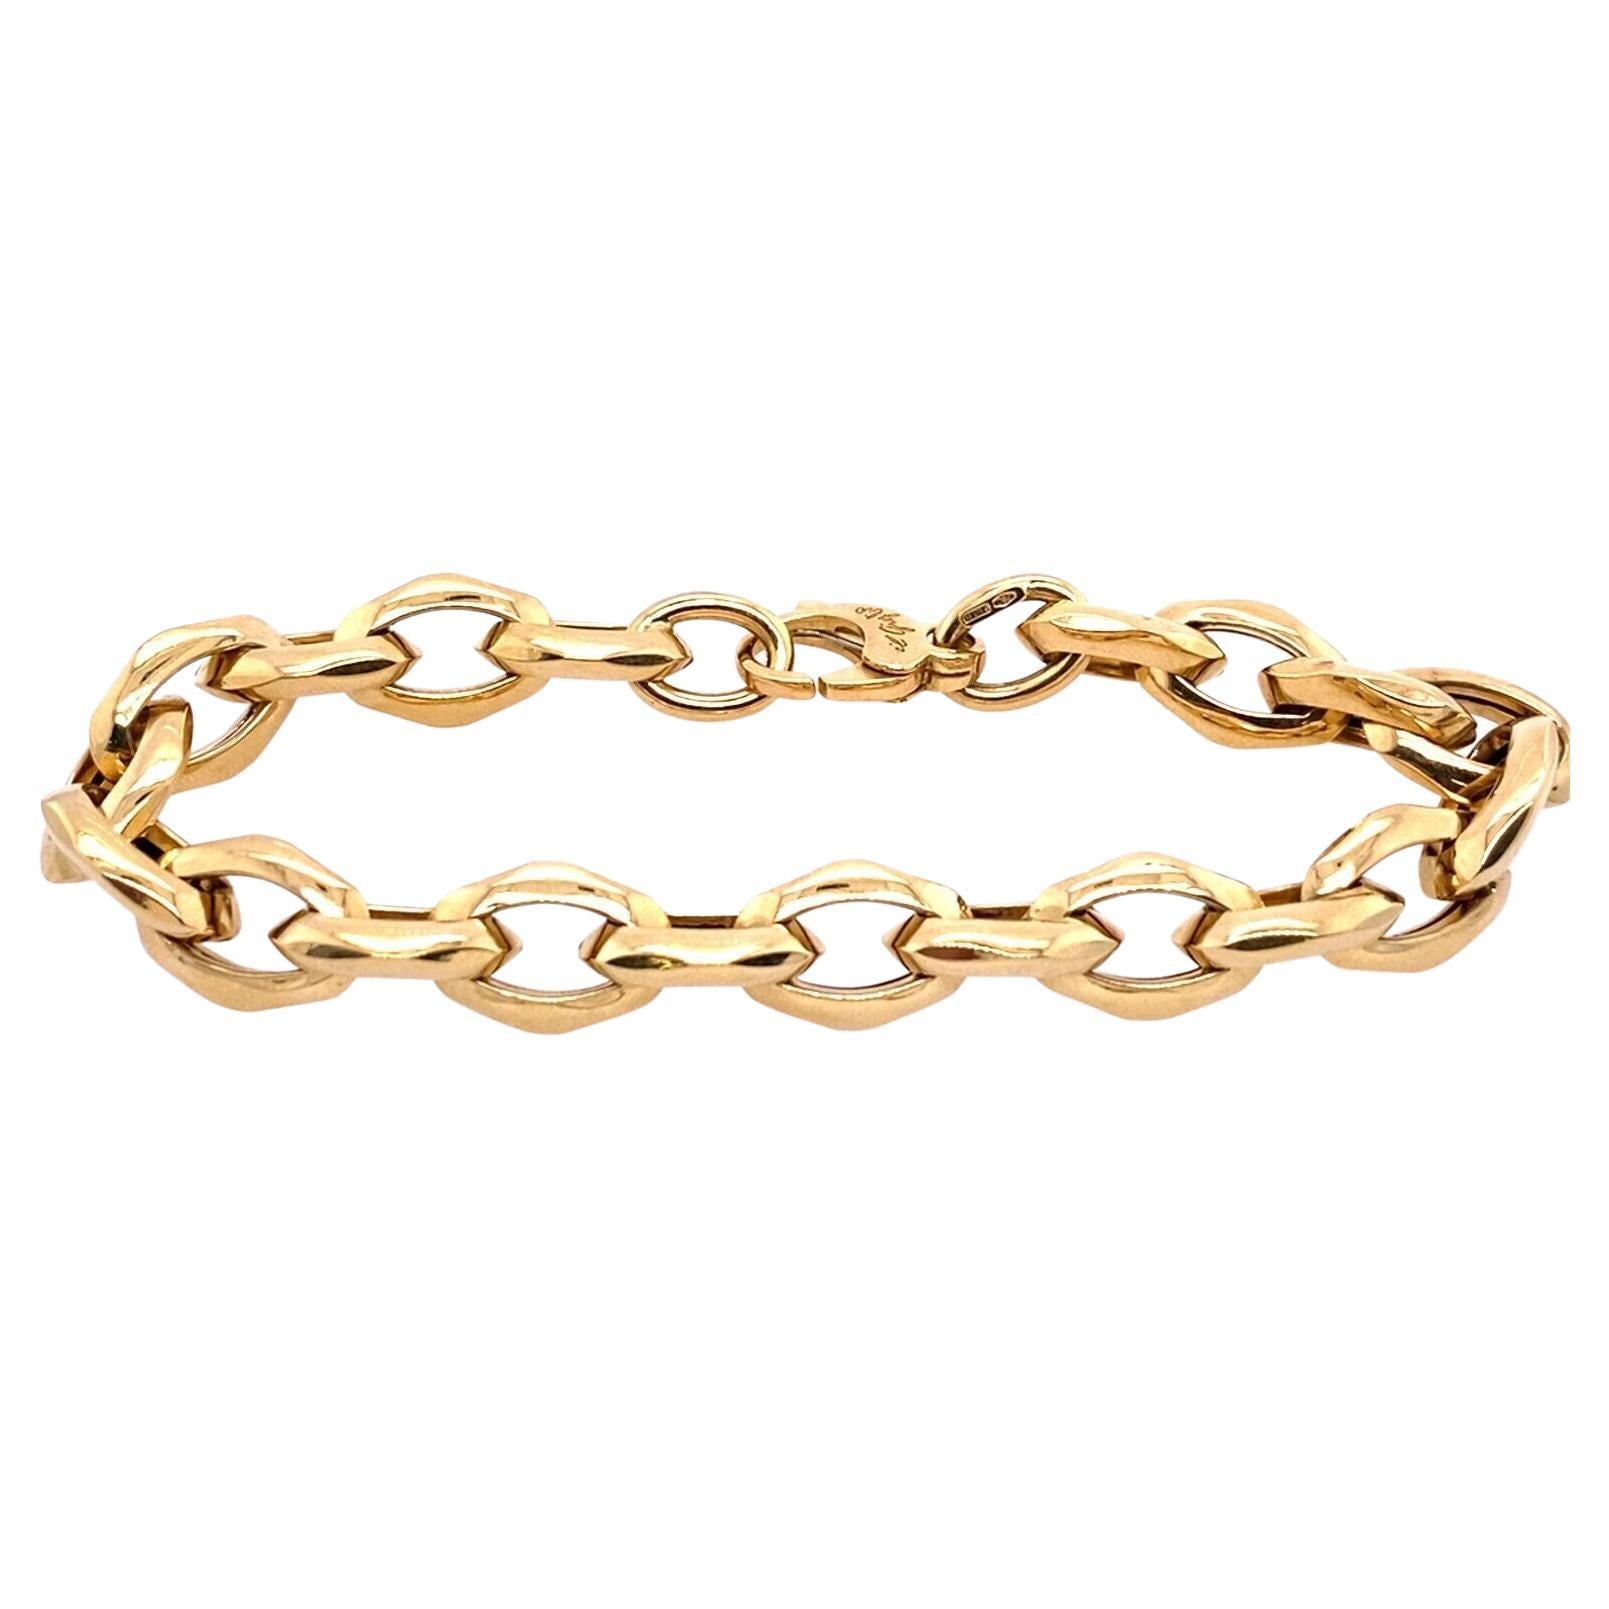 Bracelet with Lobster Clasp in 18ct Yellow Gold